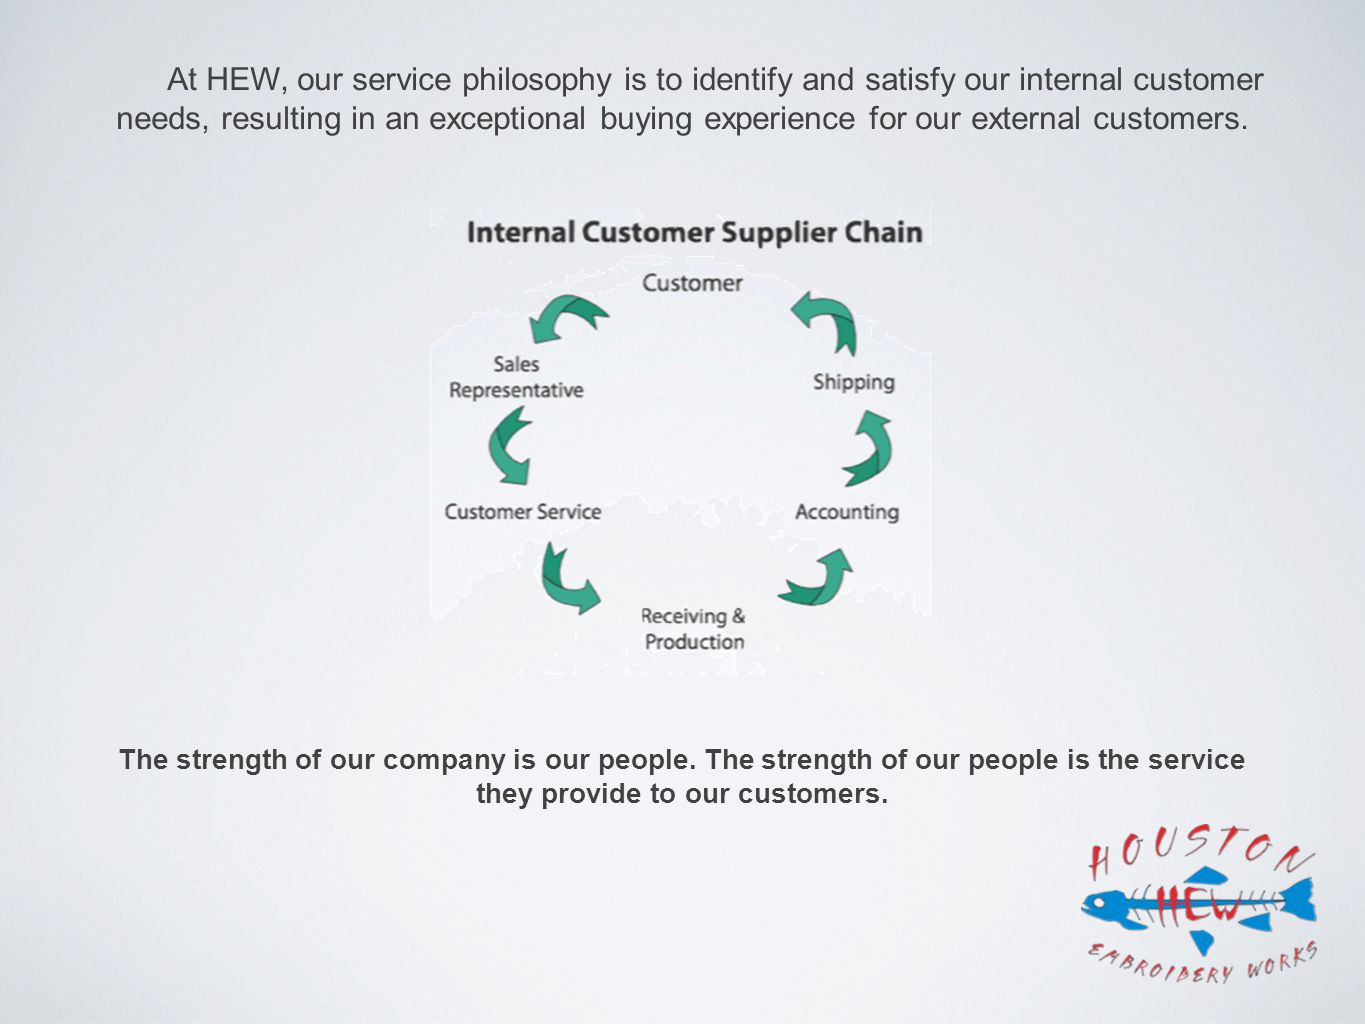 At HEW, our service philosophy is to identify and satisfy our internal customer needs, resulting in an exceptional buying experience for our external customers.